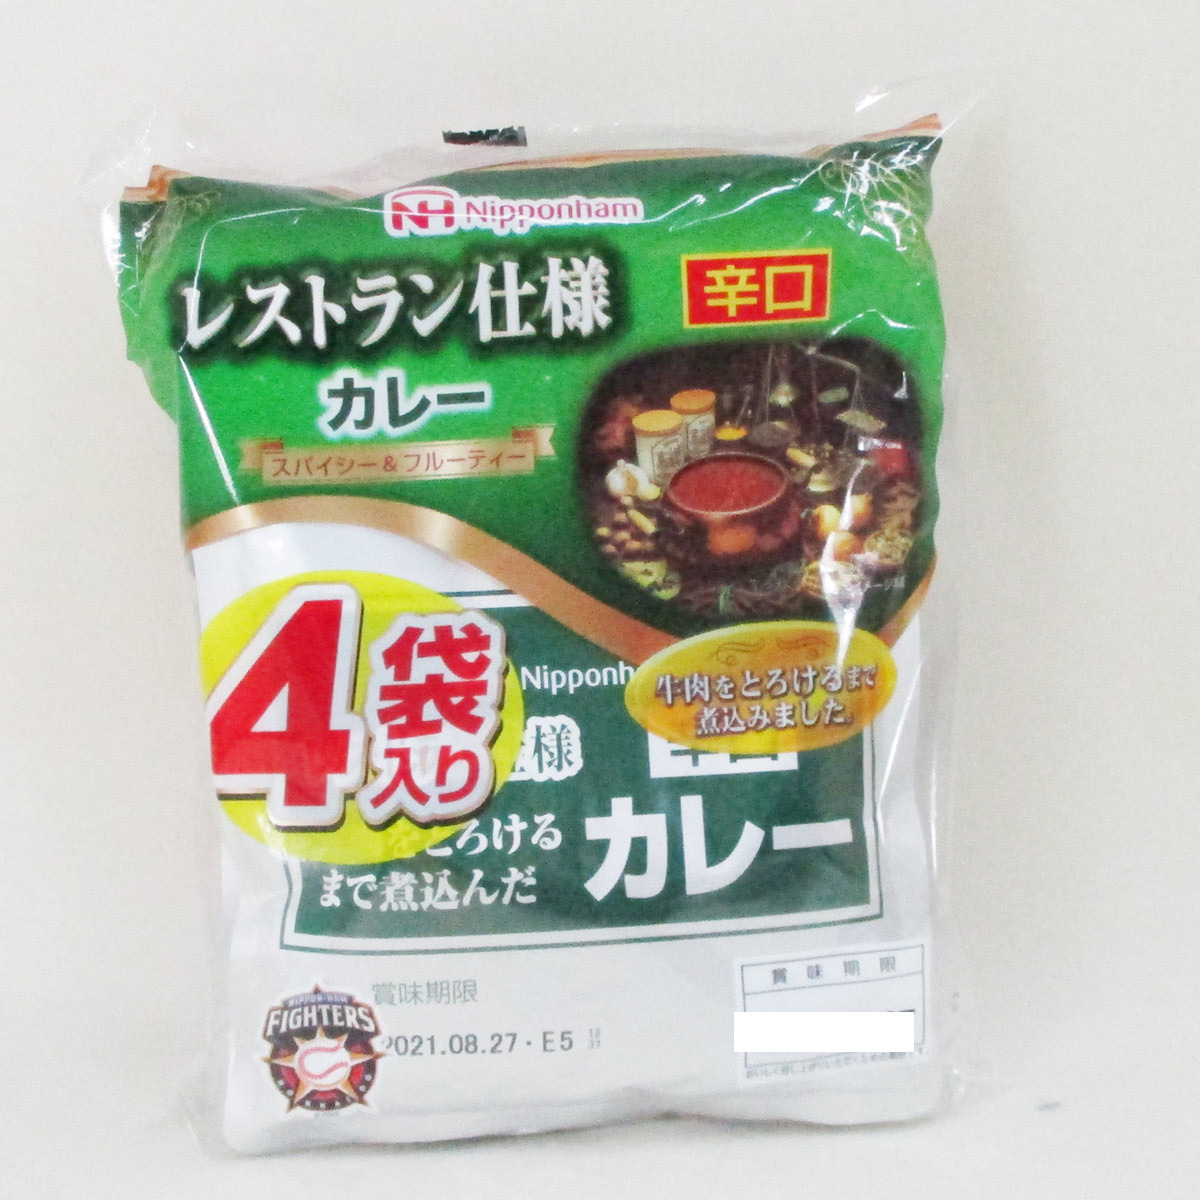  including in a package possibility retort-pouch curry restaurant specification curry Japan ham ..x4 food set 